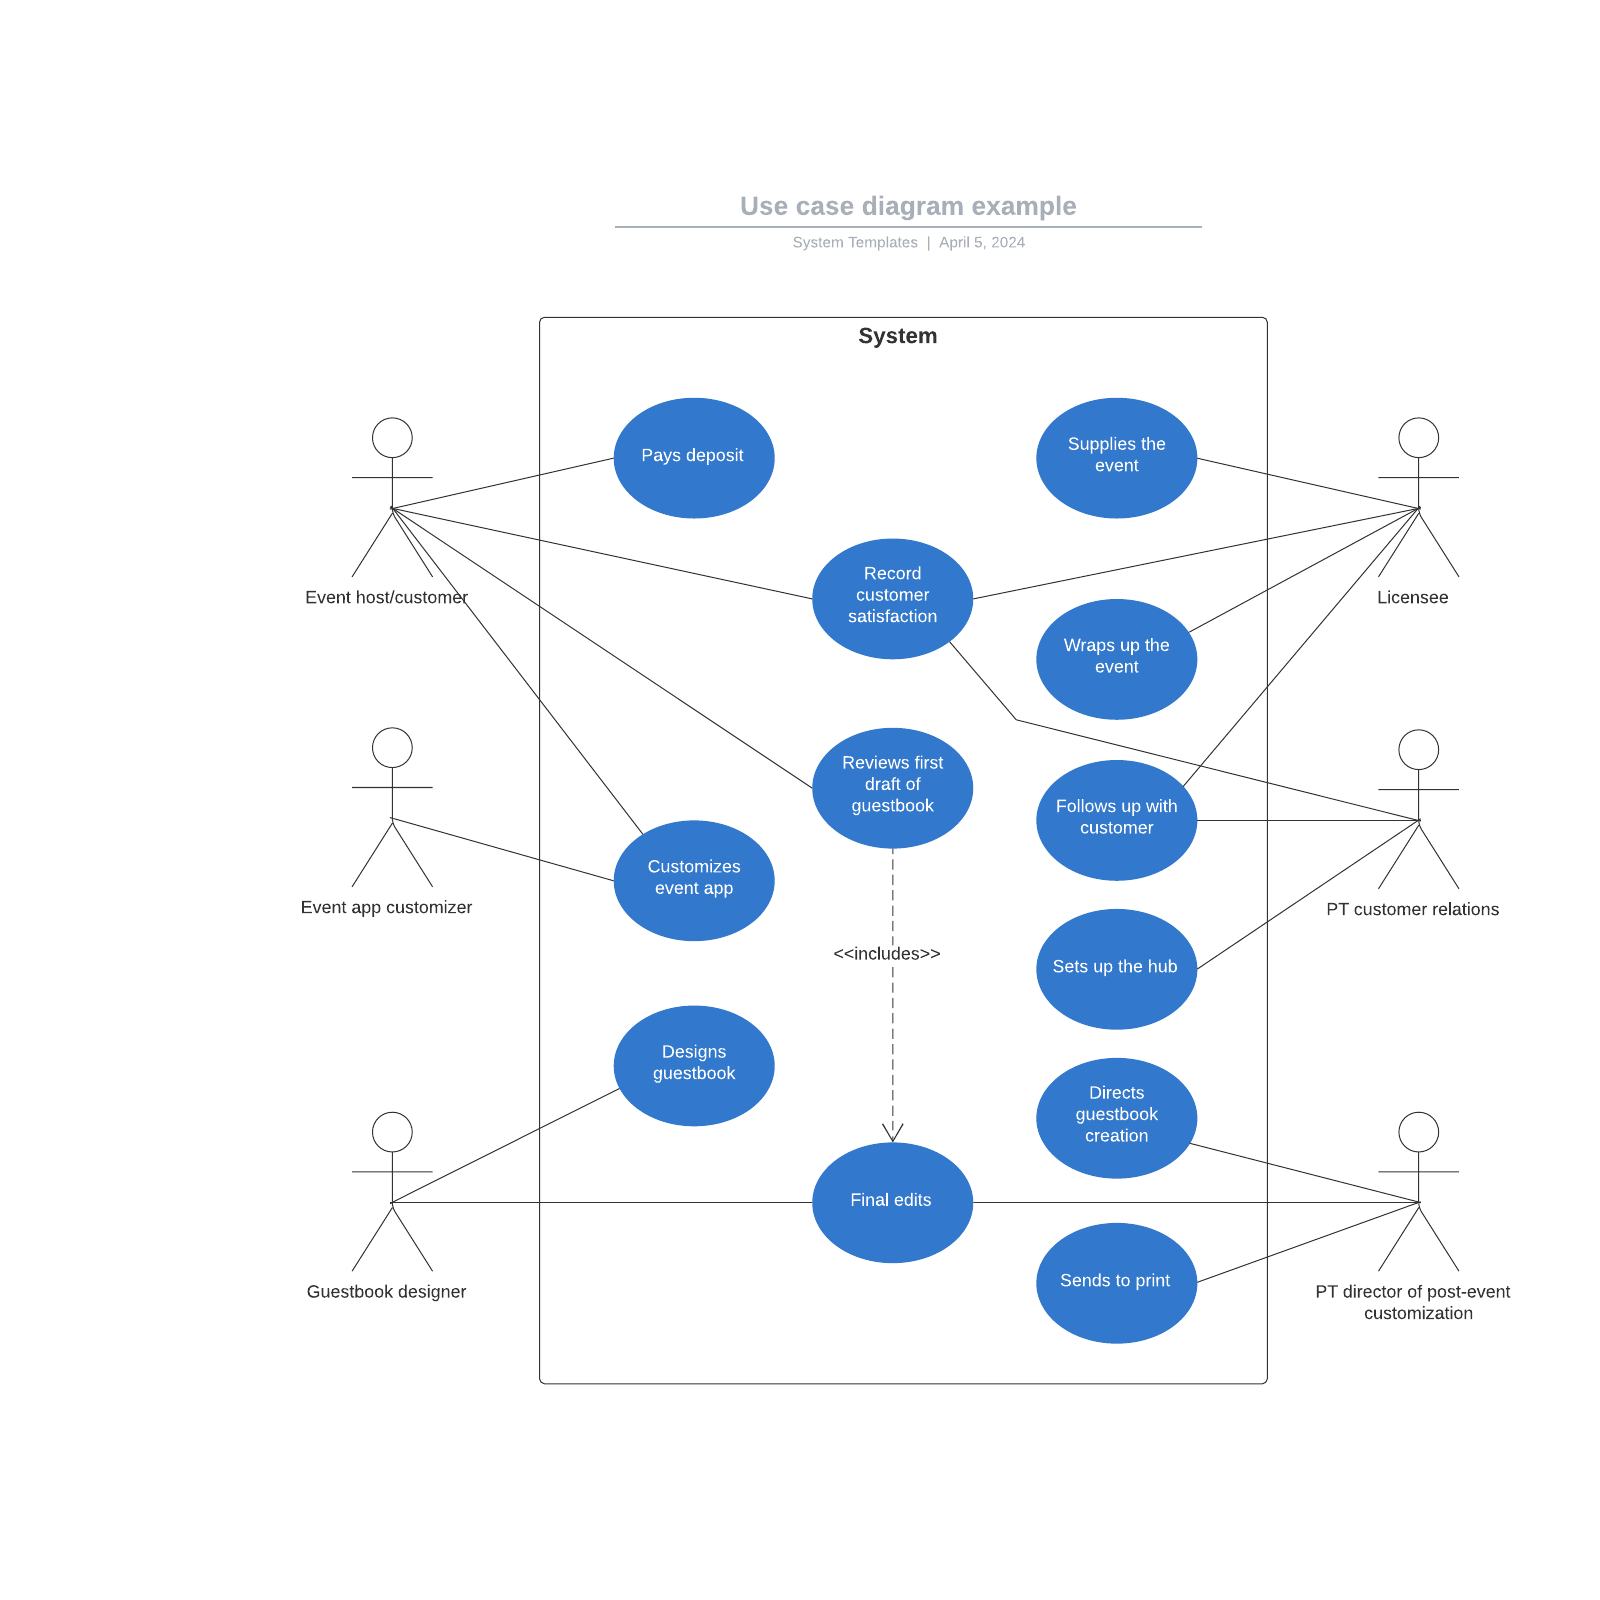 Use case diagram example example